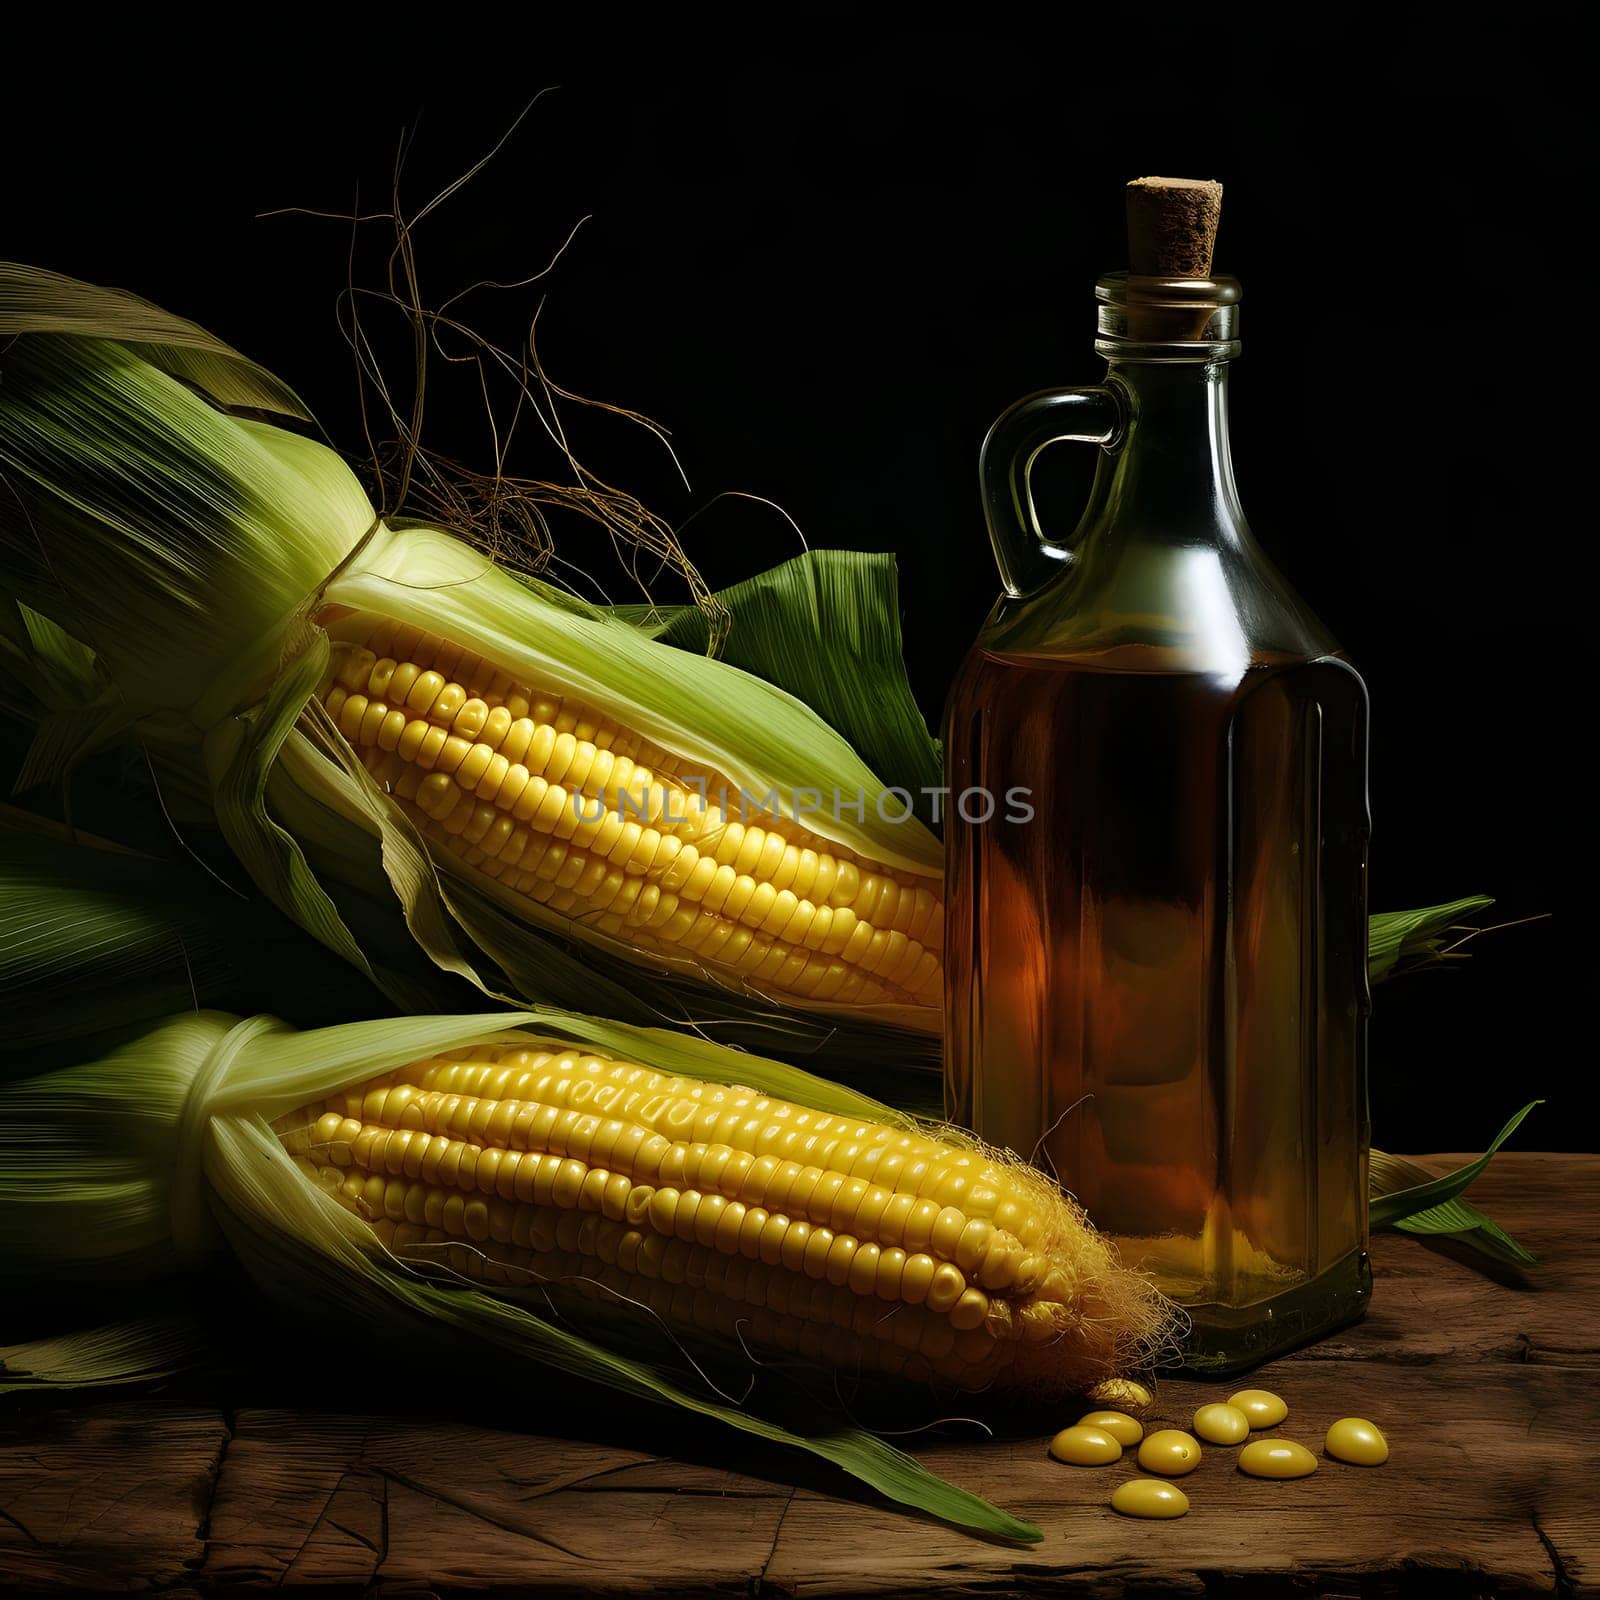 Two yellow corn cobs and a bottle with cork on a wooden table top, dark background. Corn as a dish of thanksgiving for the harvest. An atmosphere of joy and celebration.